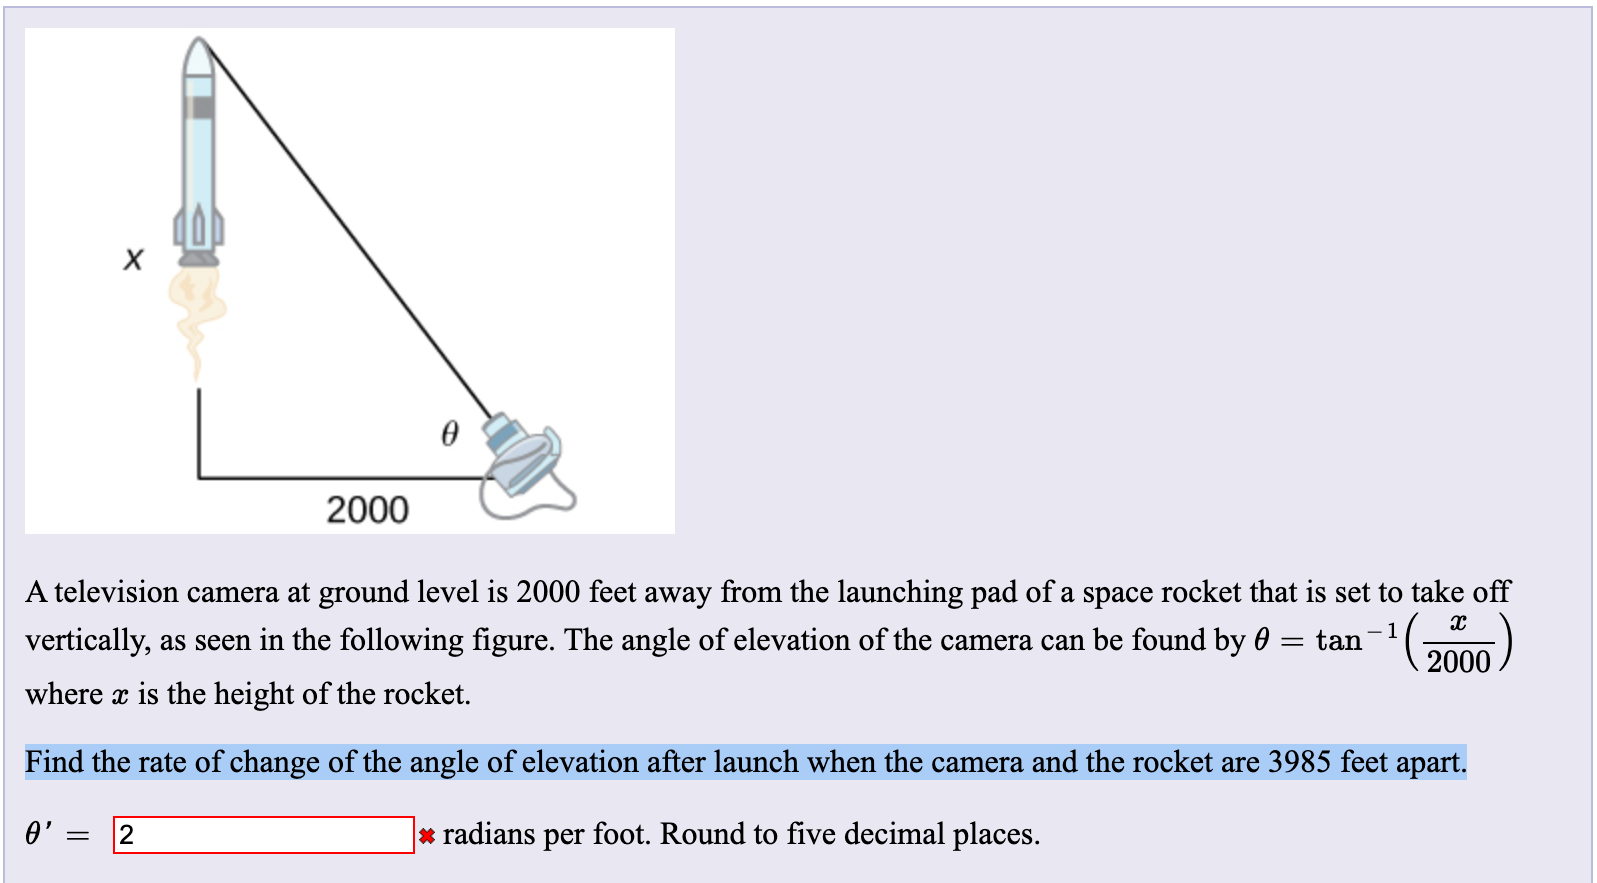 2000
television camera at ground level is 2000 feet away from the launching pad of a space rocket that is set to take off
ertically, as seen in the following figure. The angle of elevation of the camera can be found by 0
tan
2000
here x is the height of the rocket.
